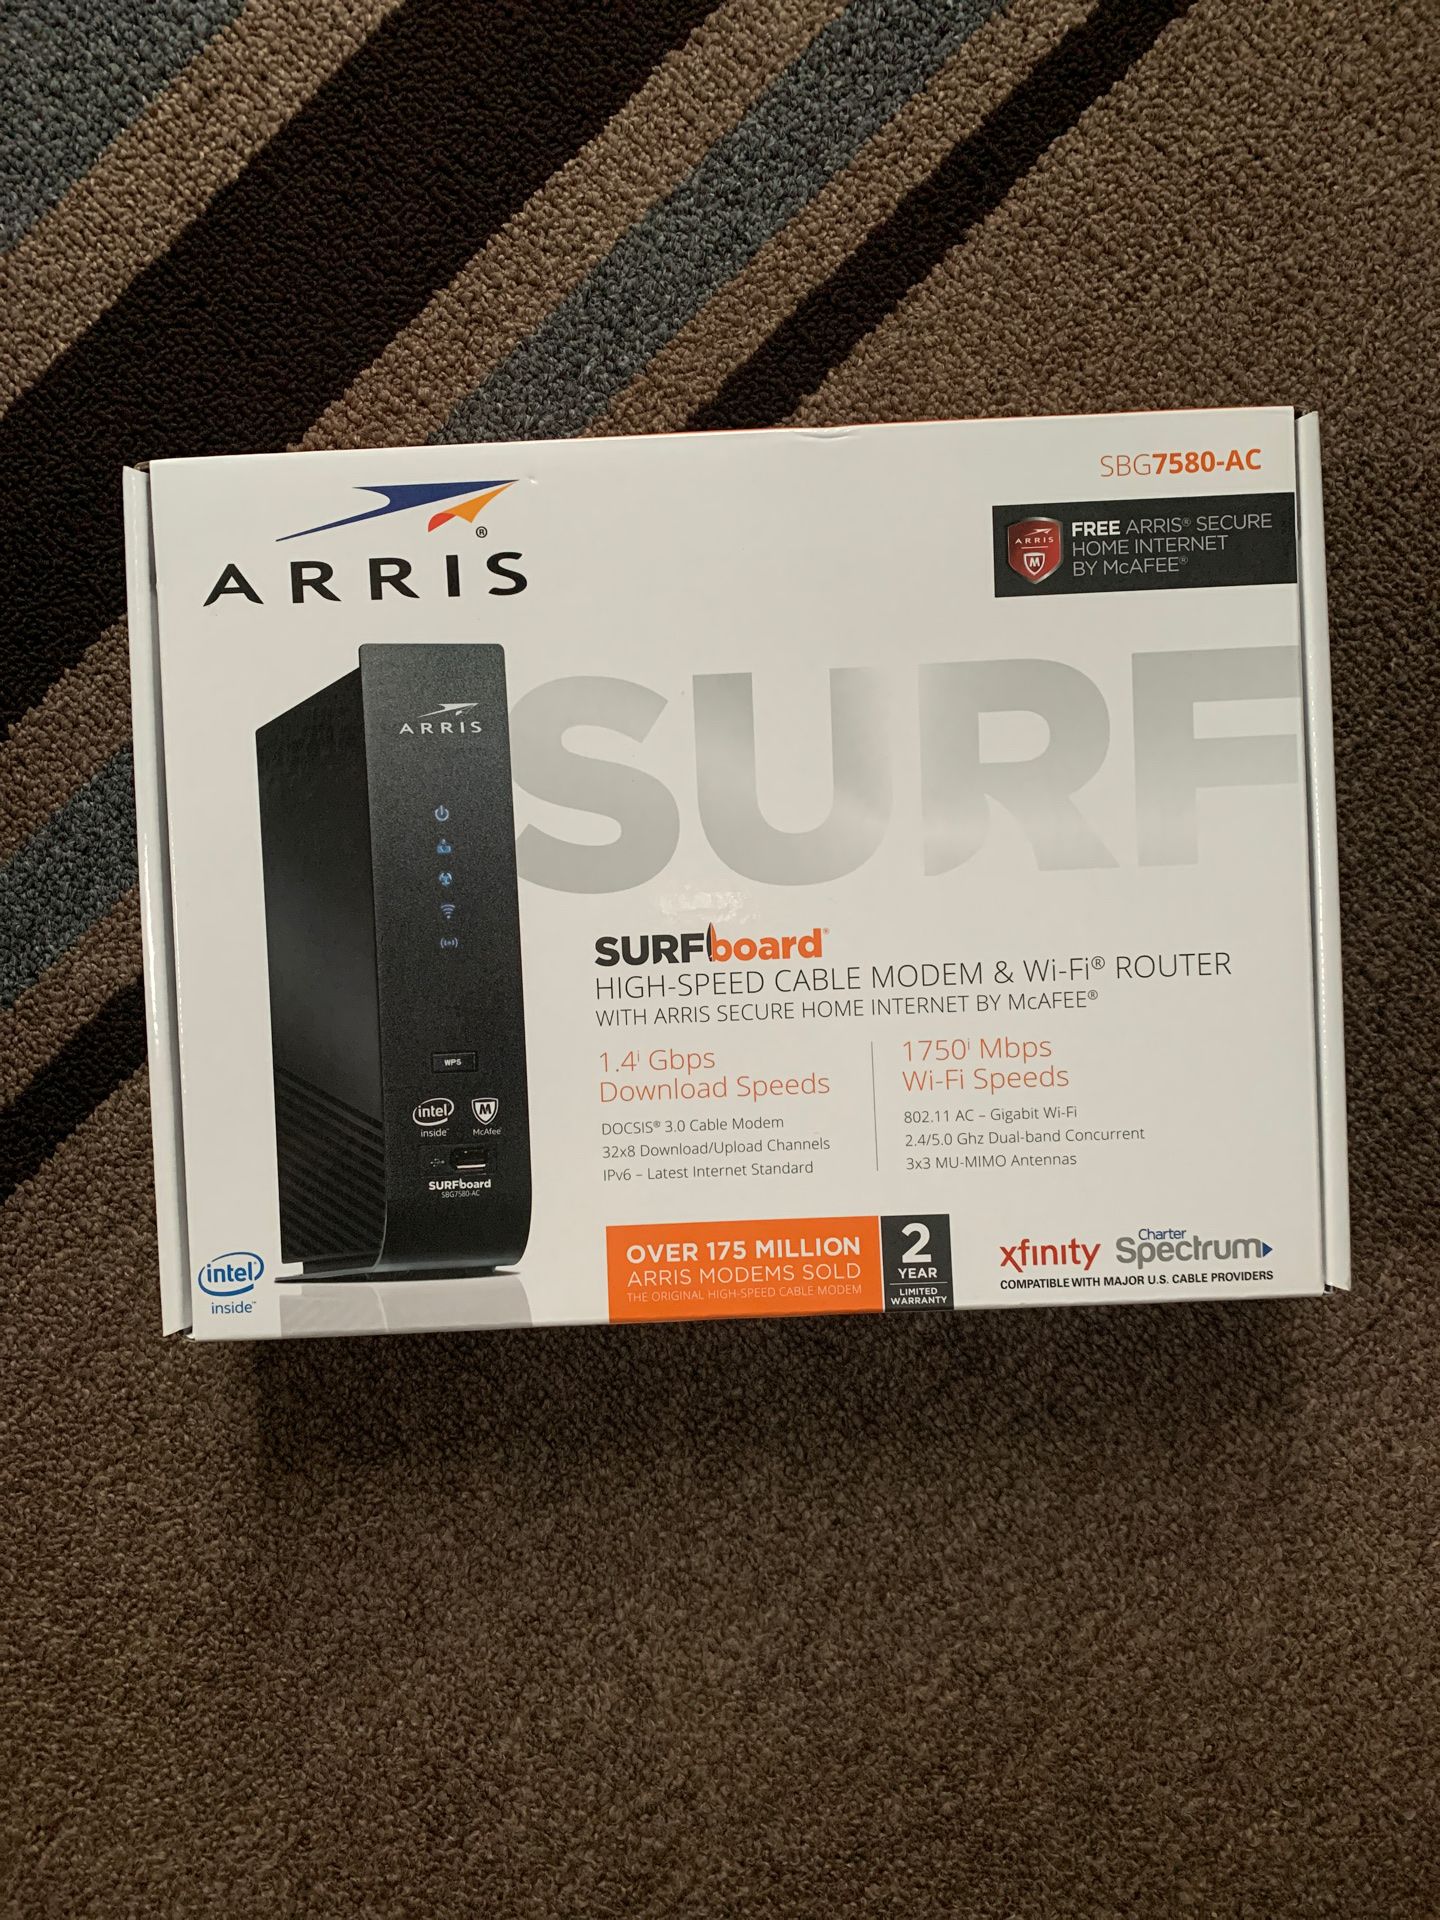 Cable modem and router combo